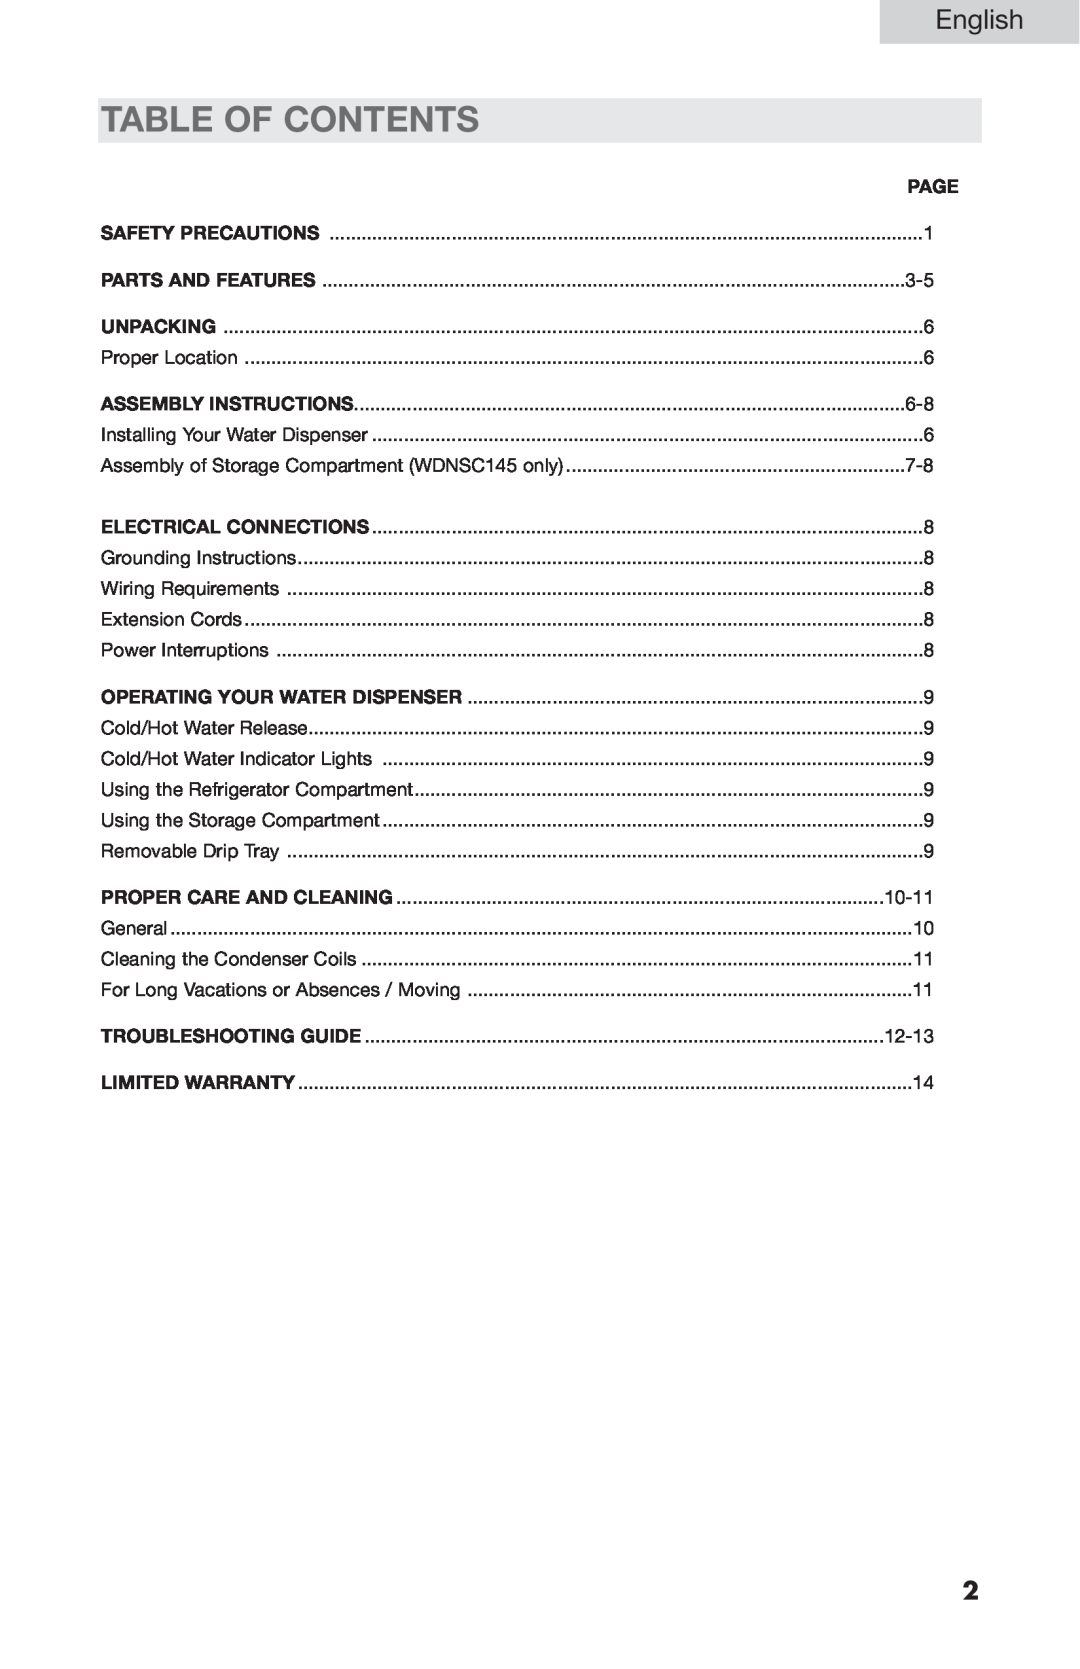 Haier WDNS045, WDNSC145, WDNS201SS, WDNS055 user manual Table Of Contents, English, Page 